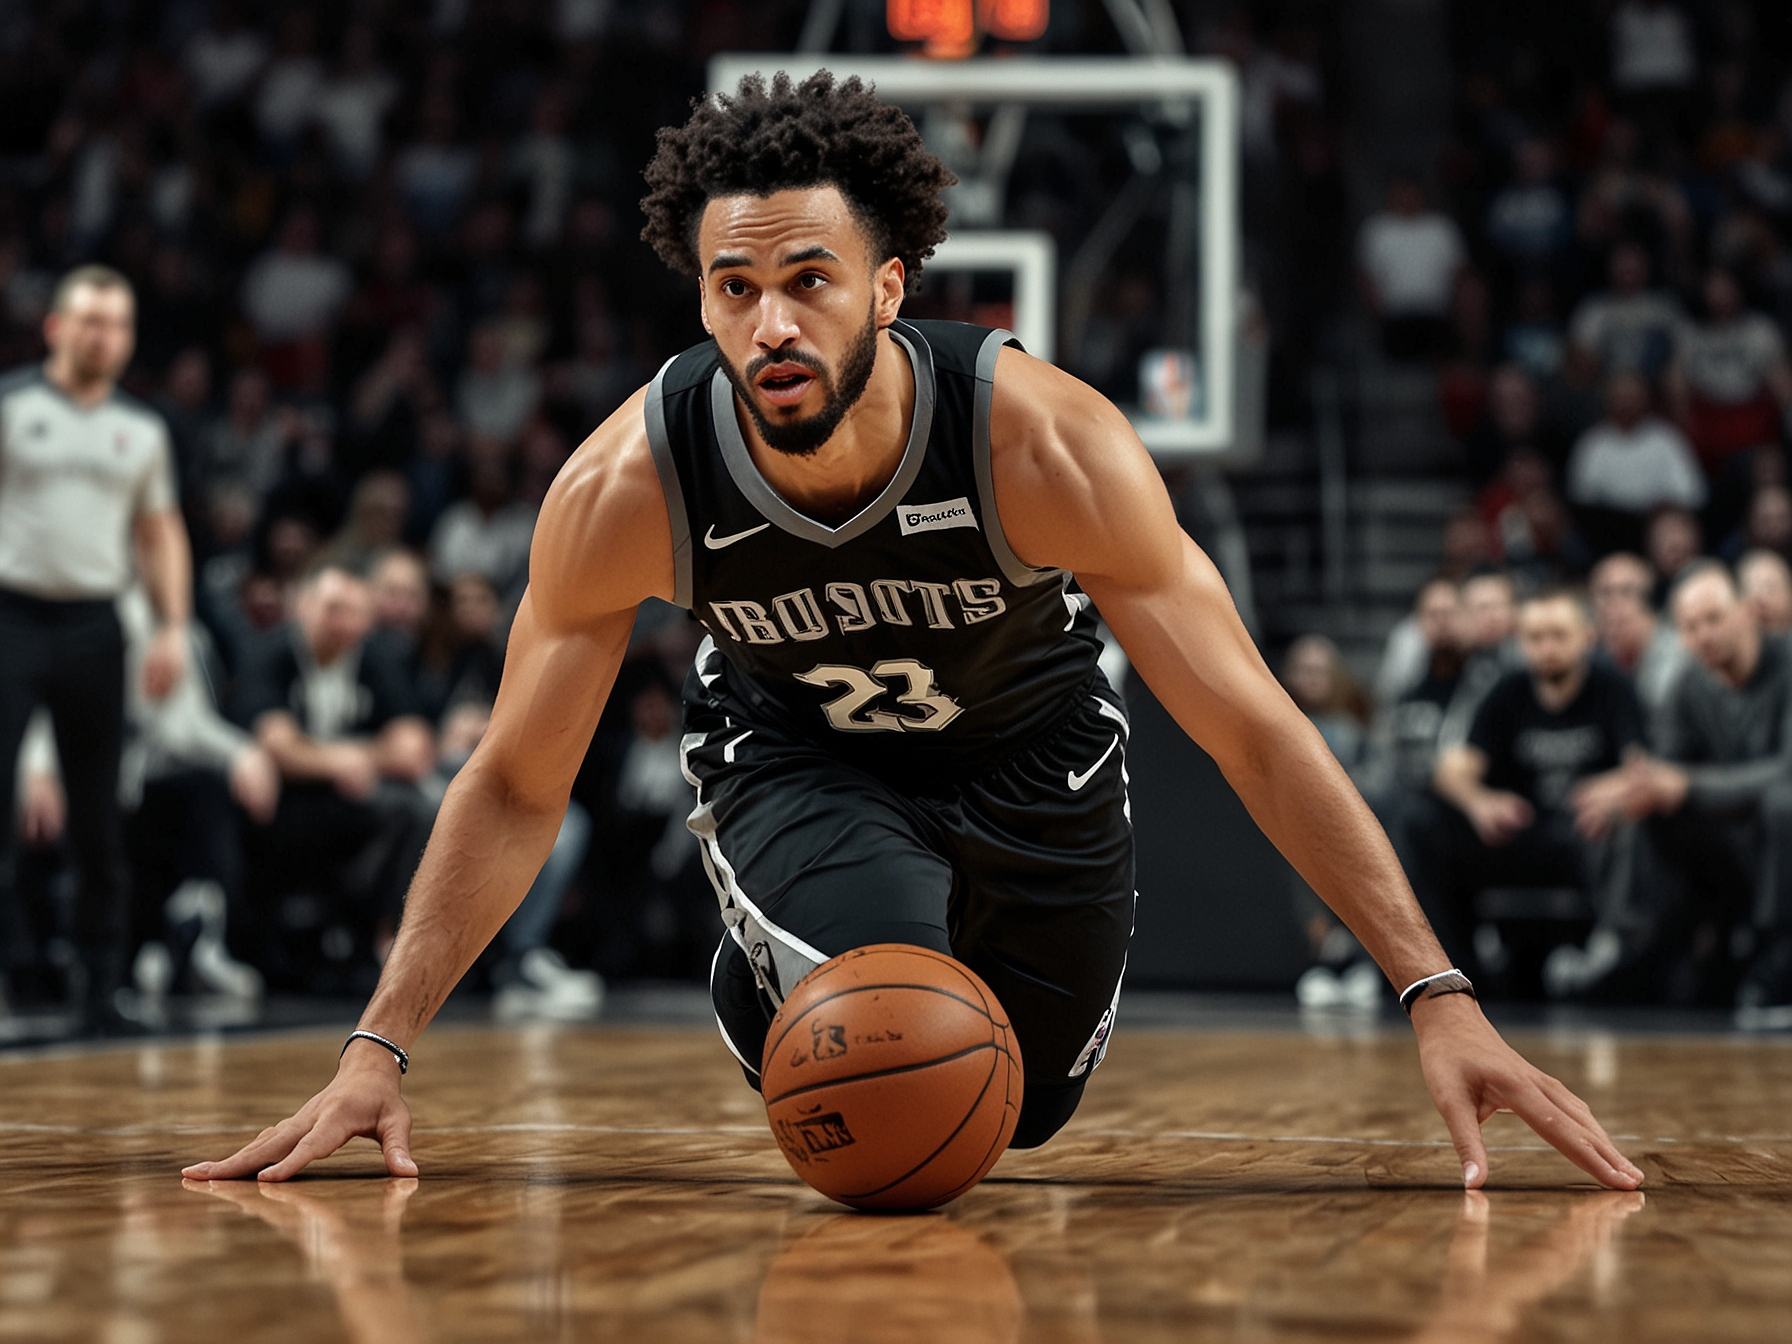 Derrick White diving on the hardwood floor with determination to secure a loose ball during a high-pressure NBA game, showcasing his exceptional hustle.